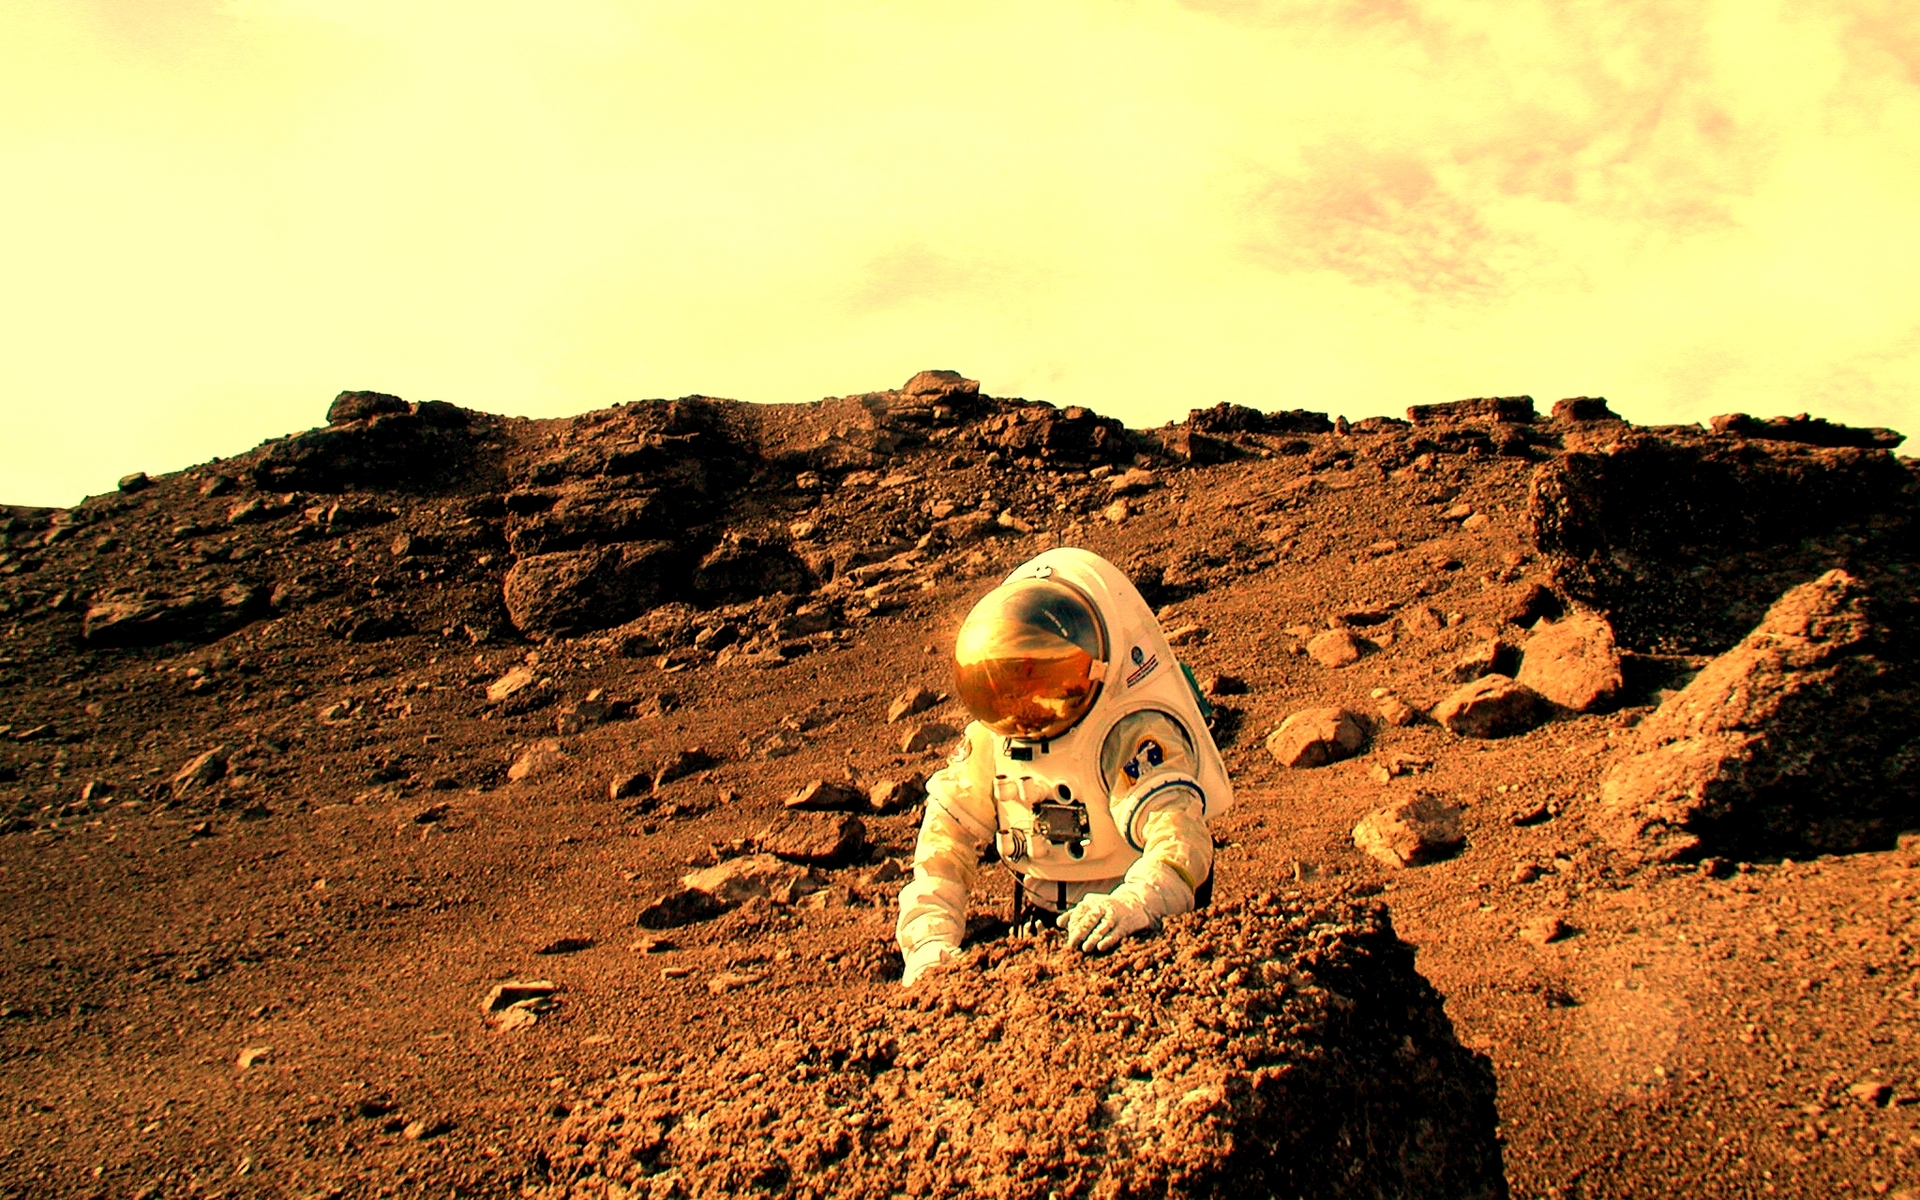 Past Life on Mars – Why Don’t We Just Look For Oil?